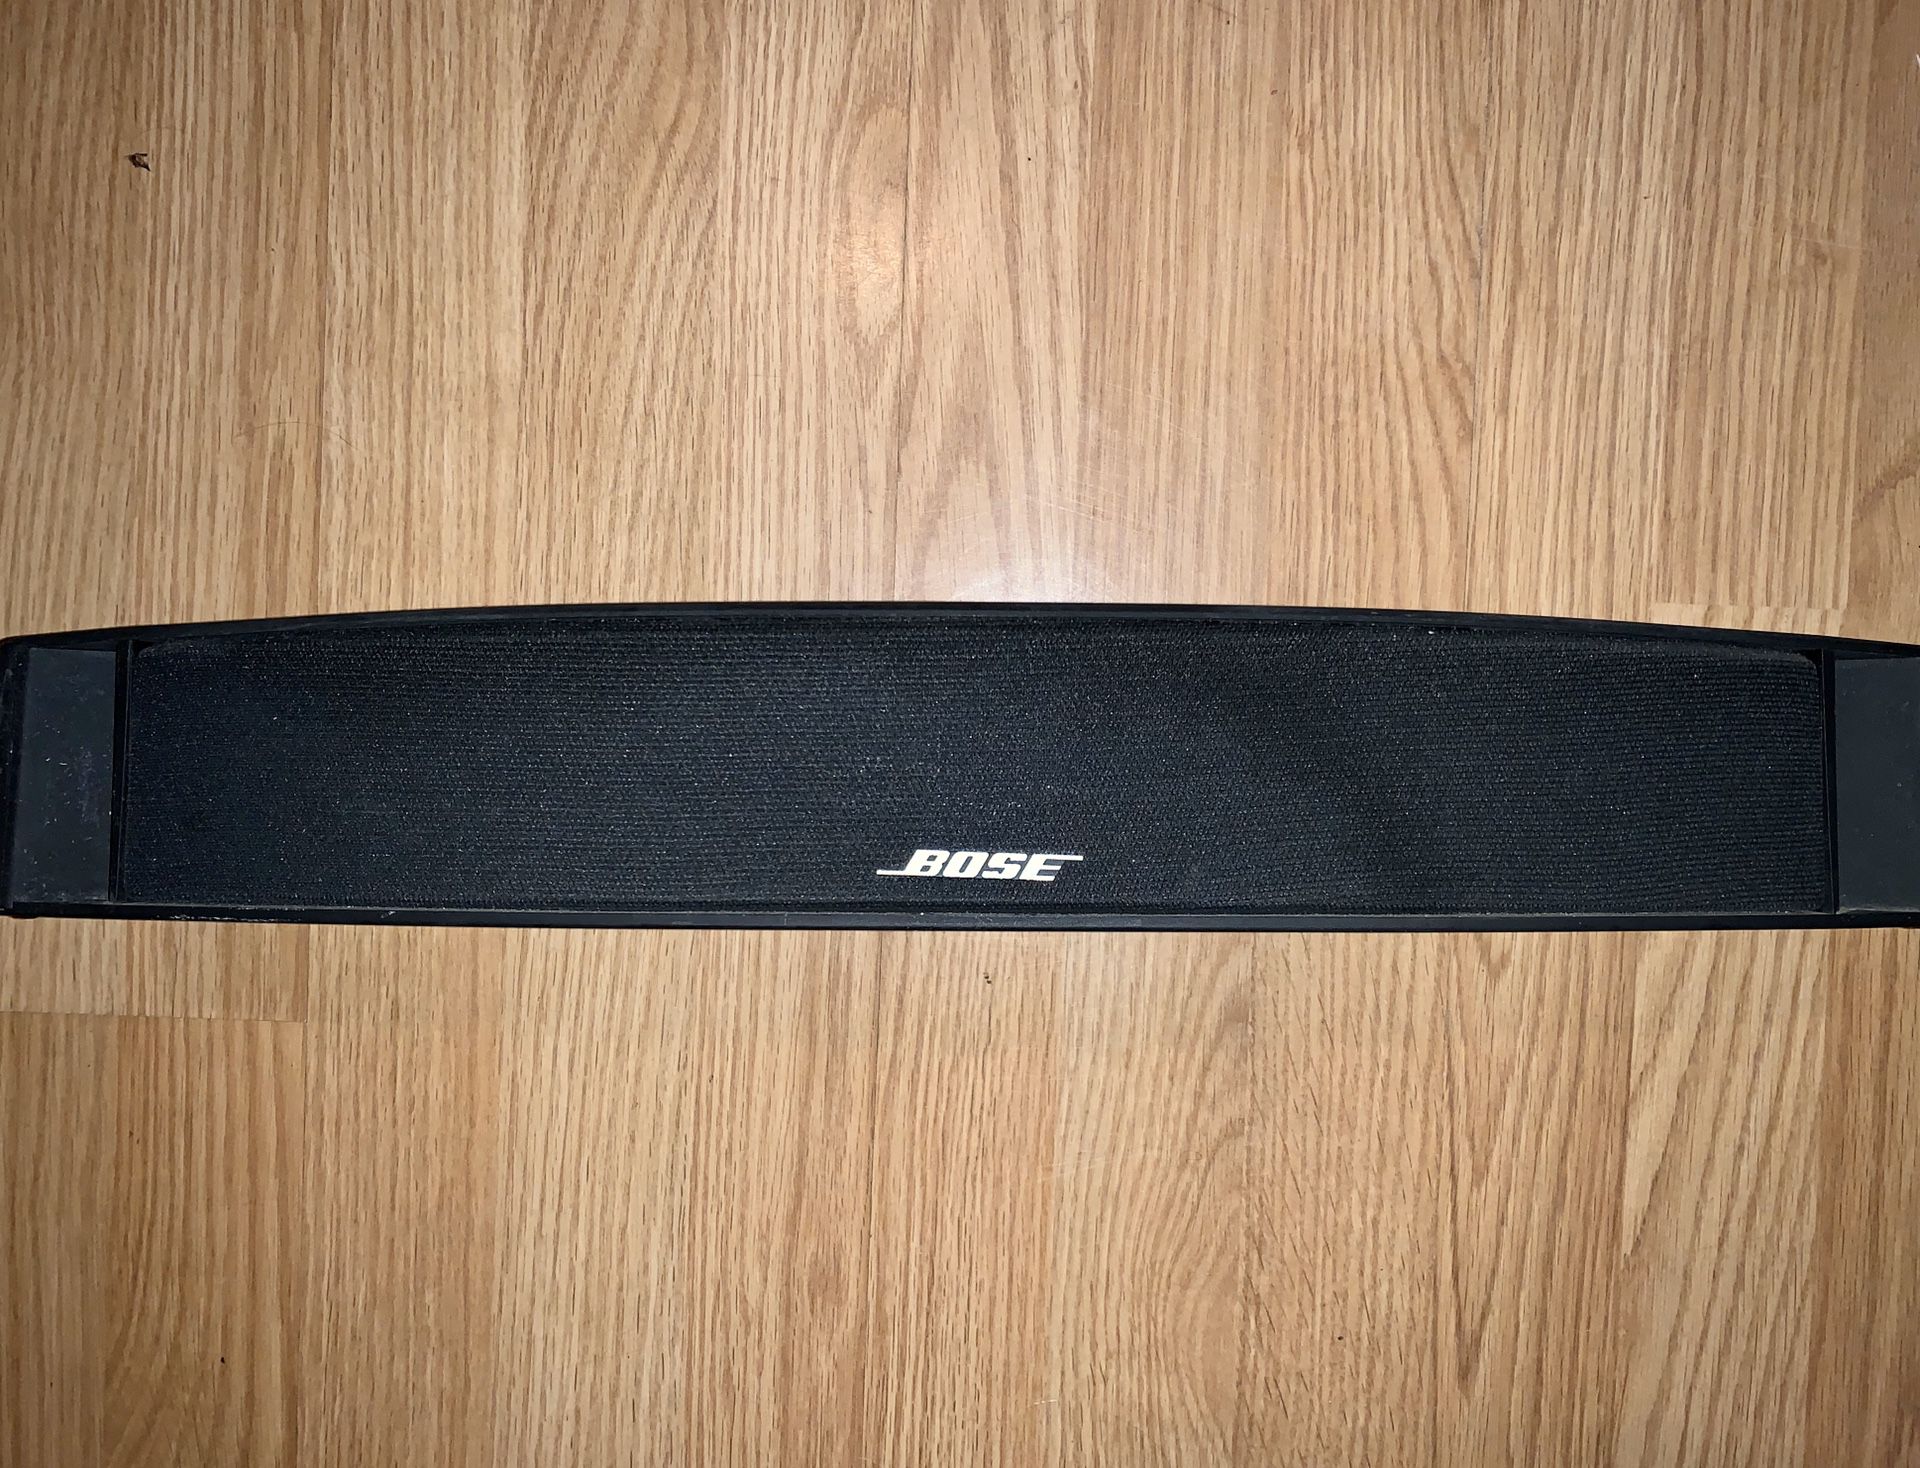 Bose center channel speaker great condition